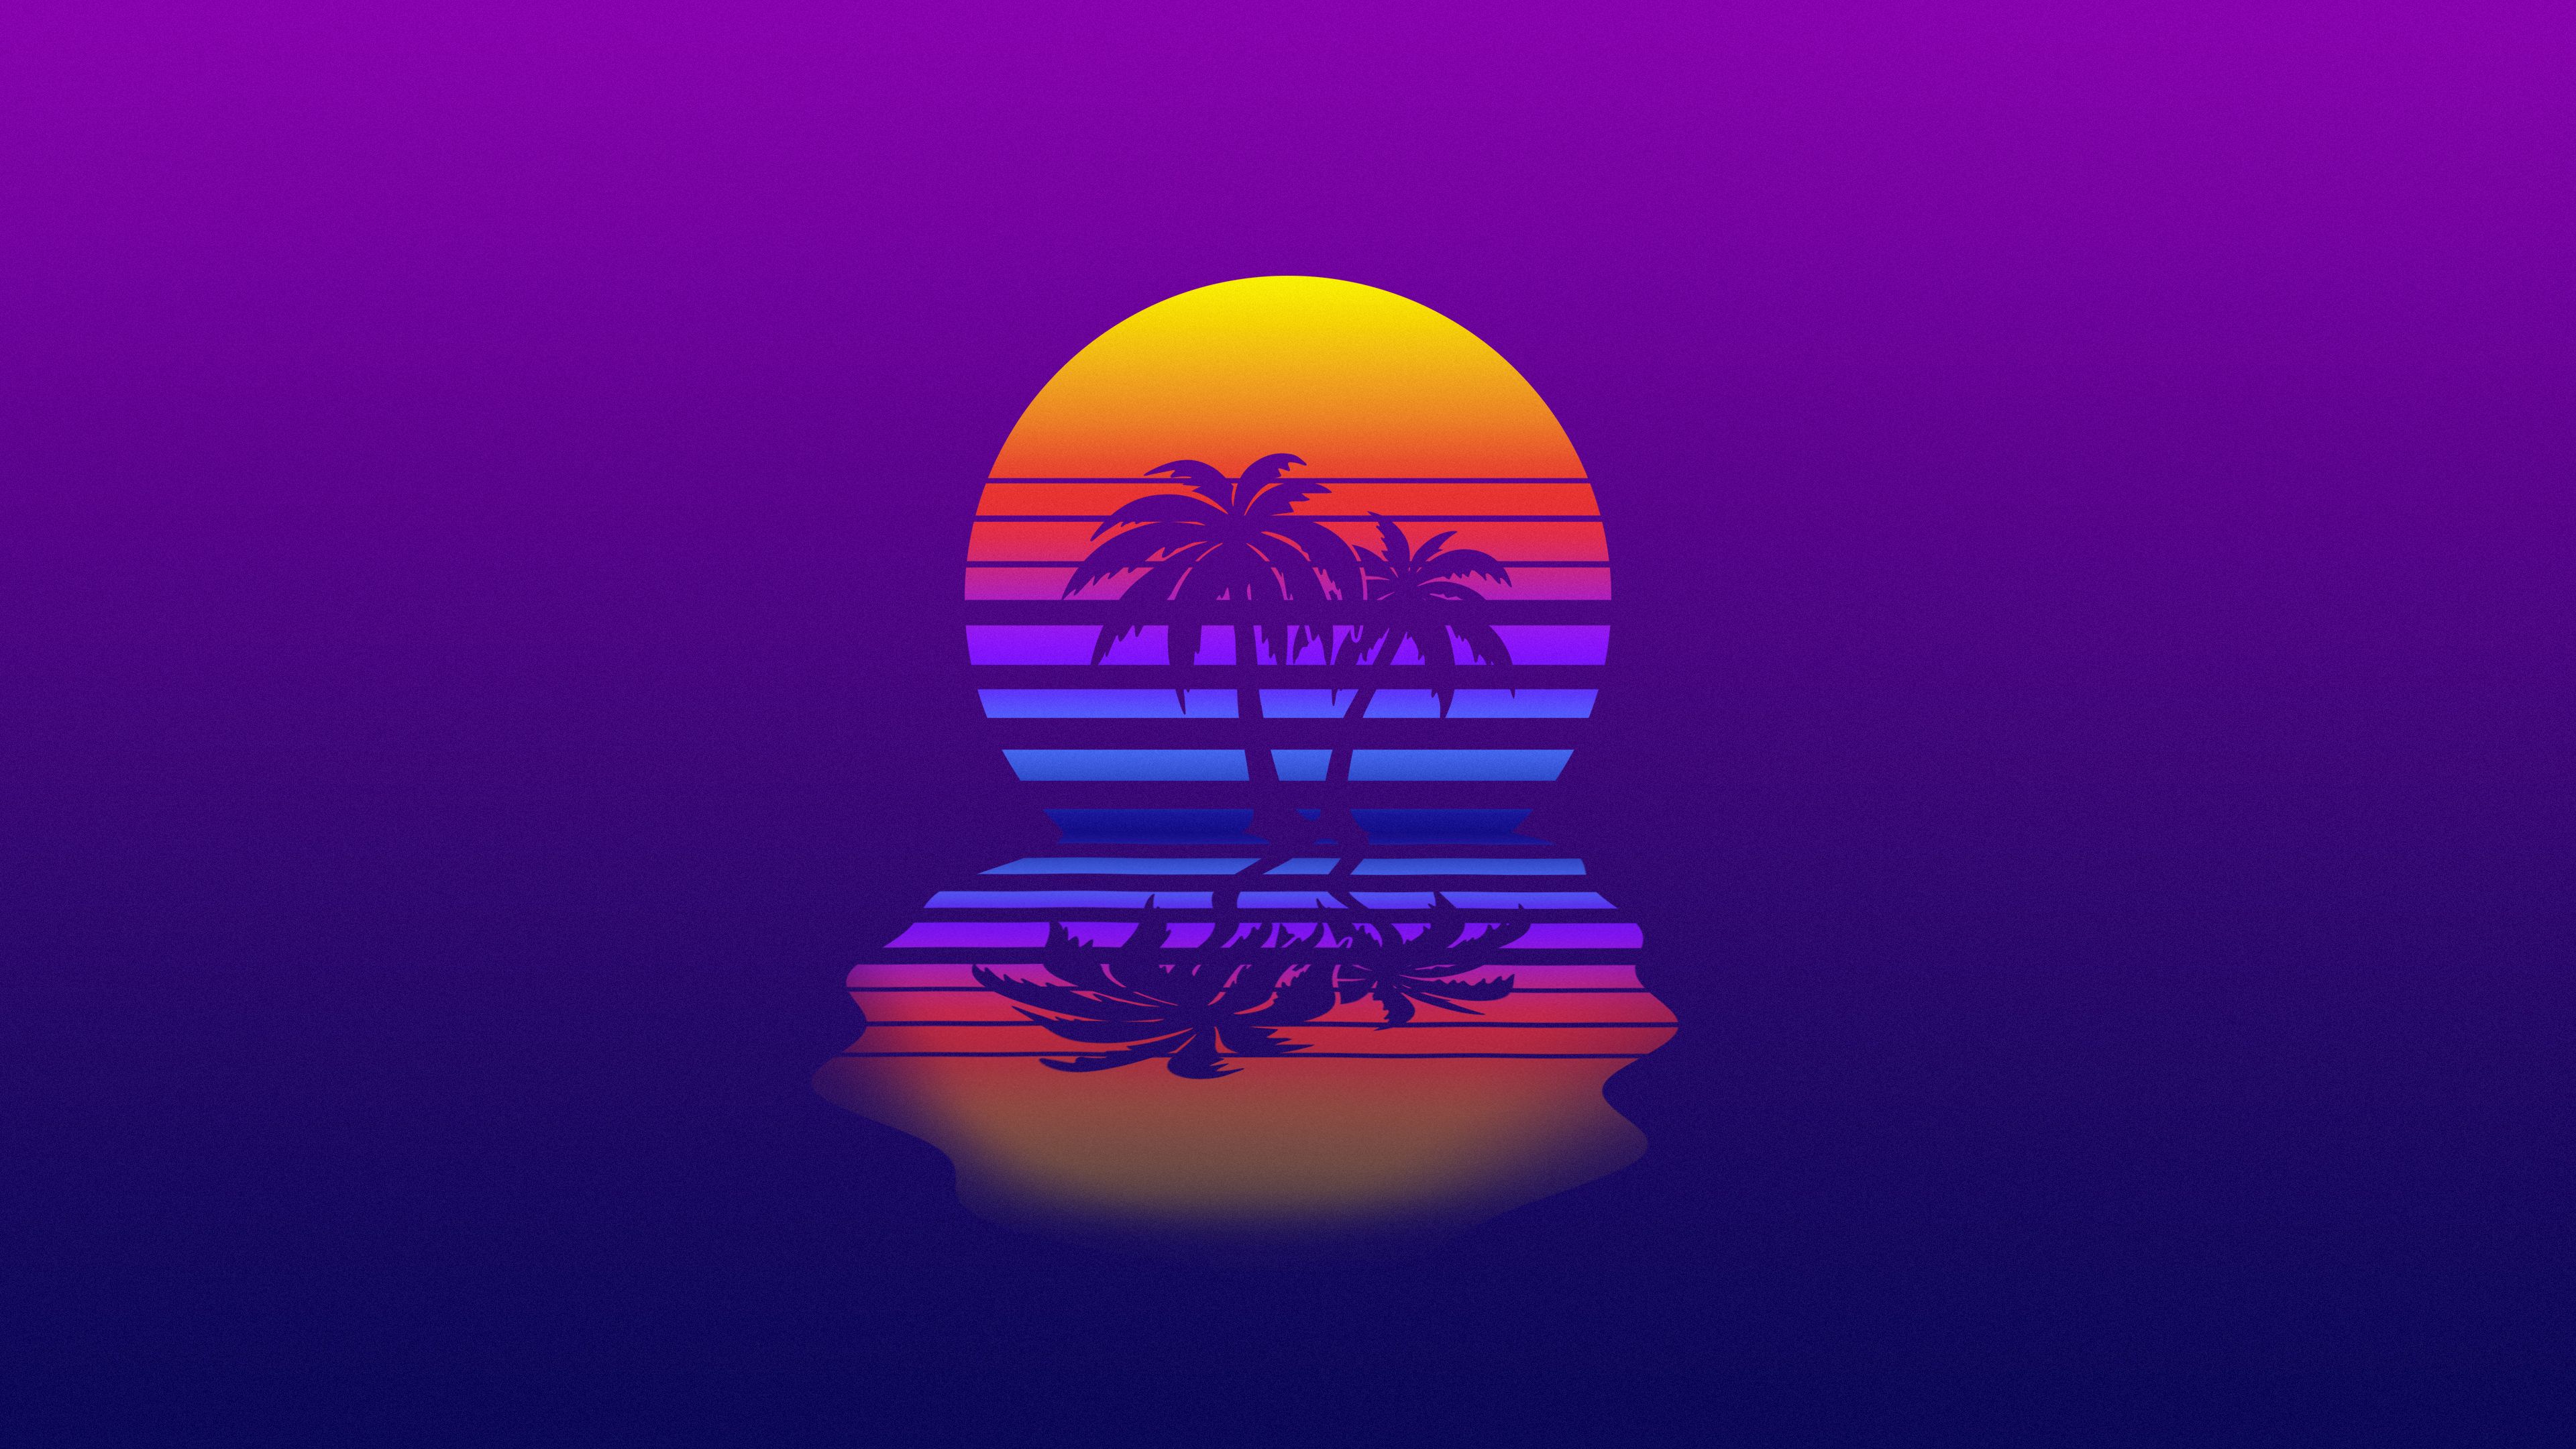 Palm Tree Synthwave, HD Artist, 4k Wallpaper, Image, Background